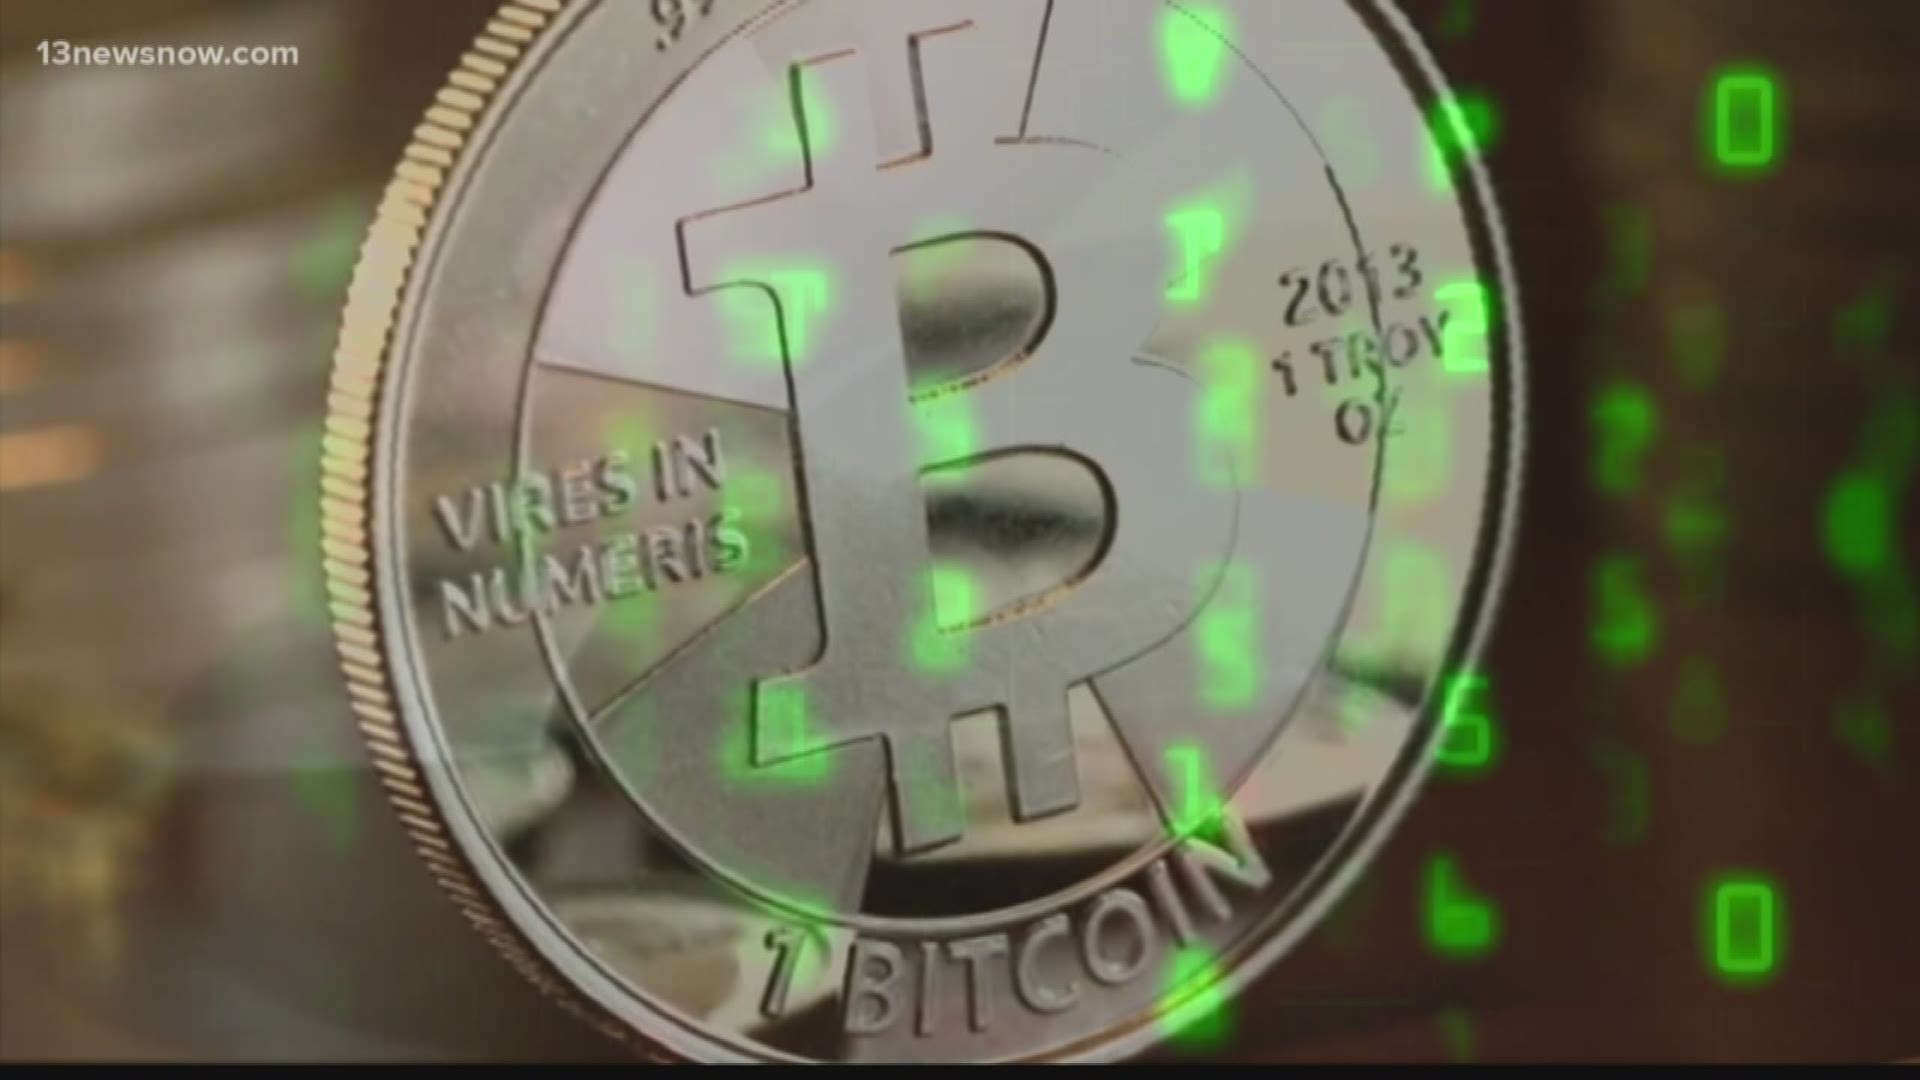 A local couple is accused of using bitcoin to orchestrate a credit card fraud scheme.